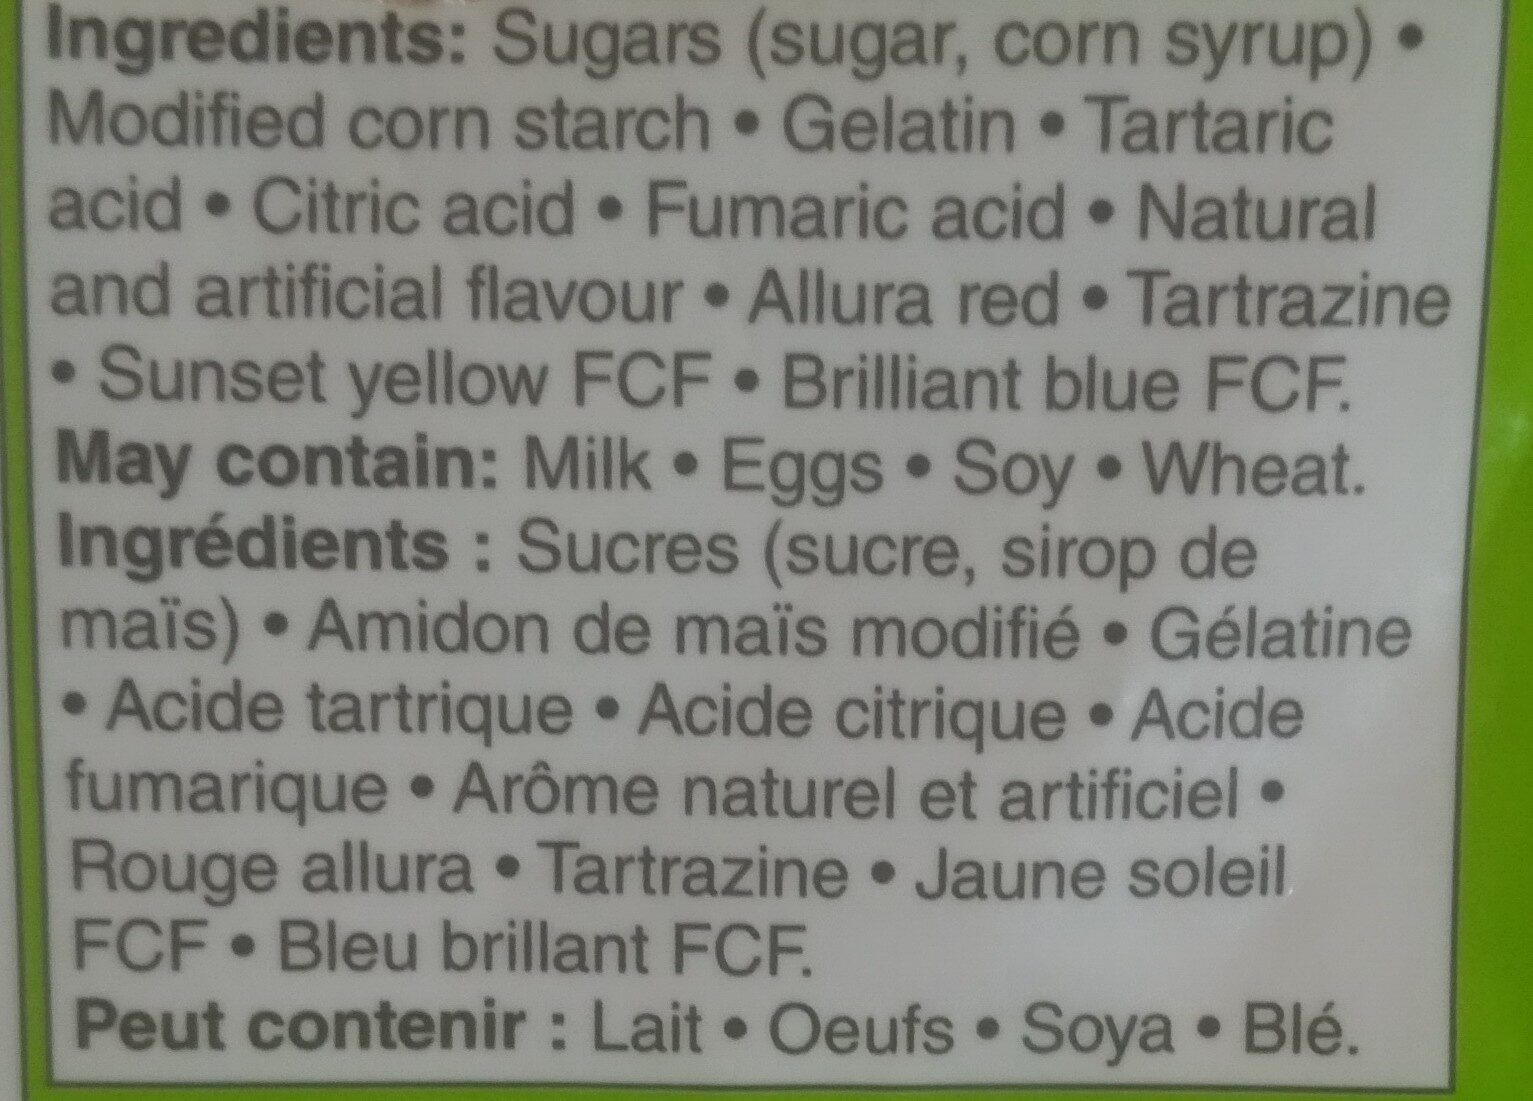 Sour Tongue Teasers - Ingredients